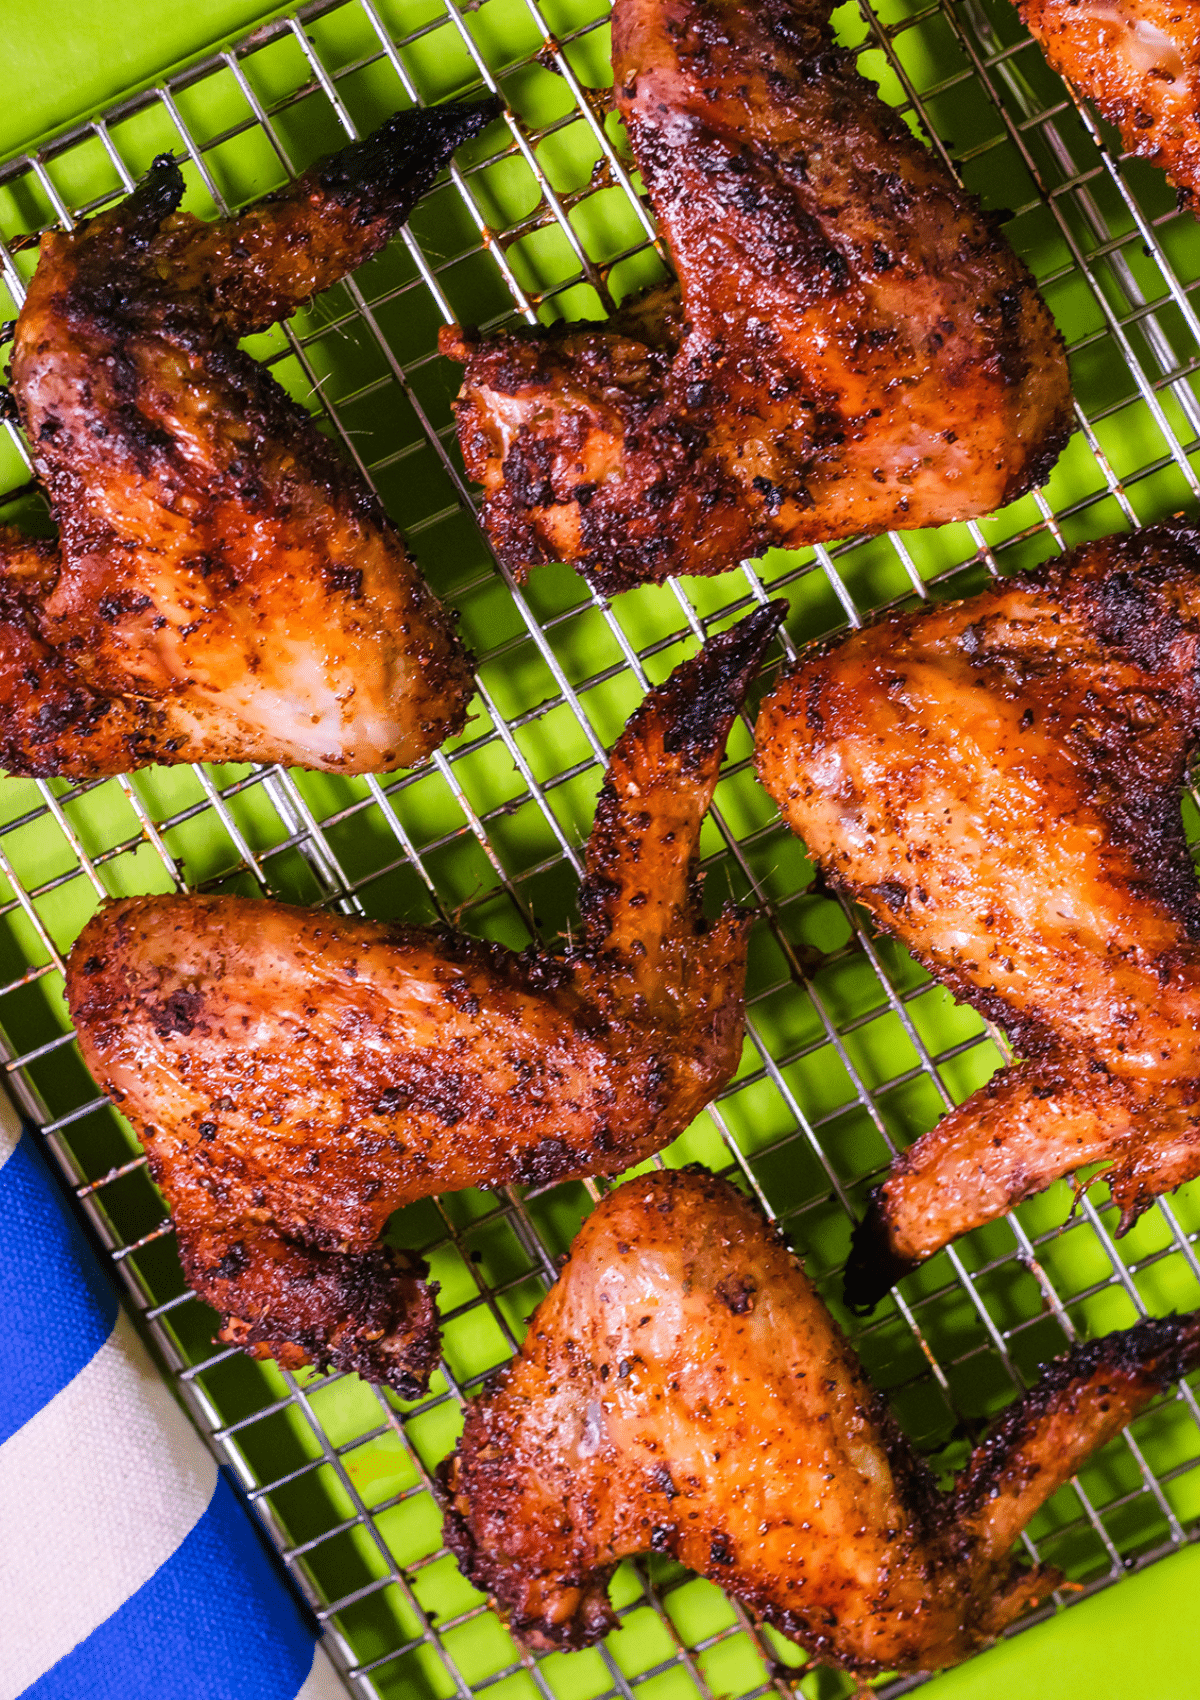 Mouth-Watering Baked Chicken Wings